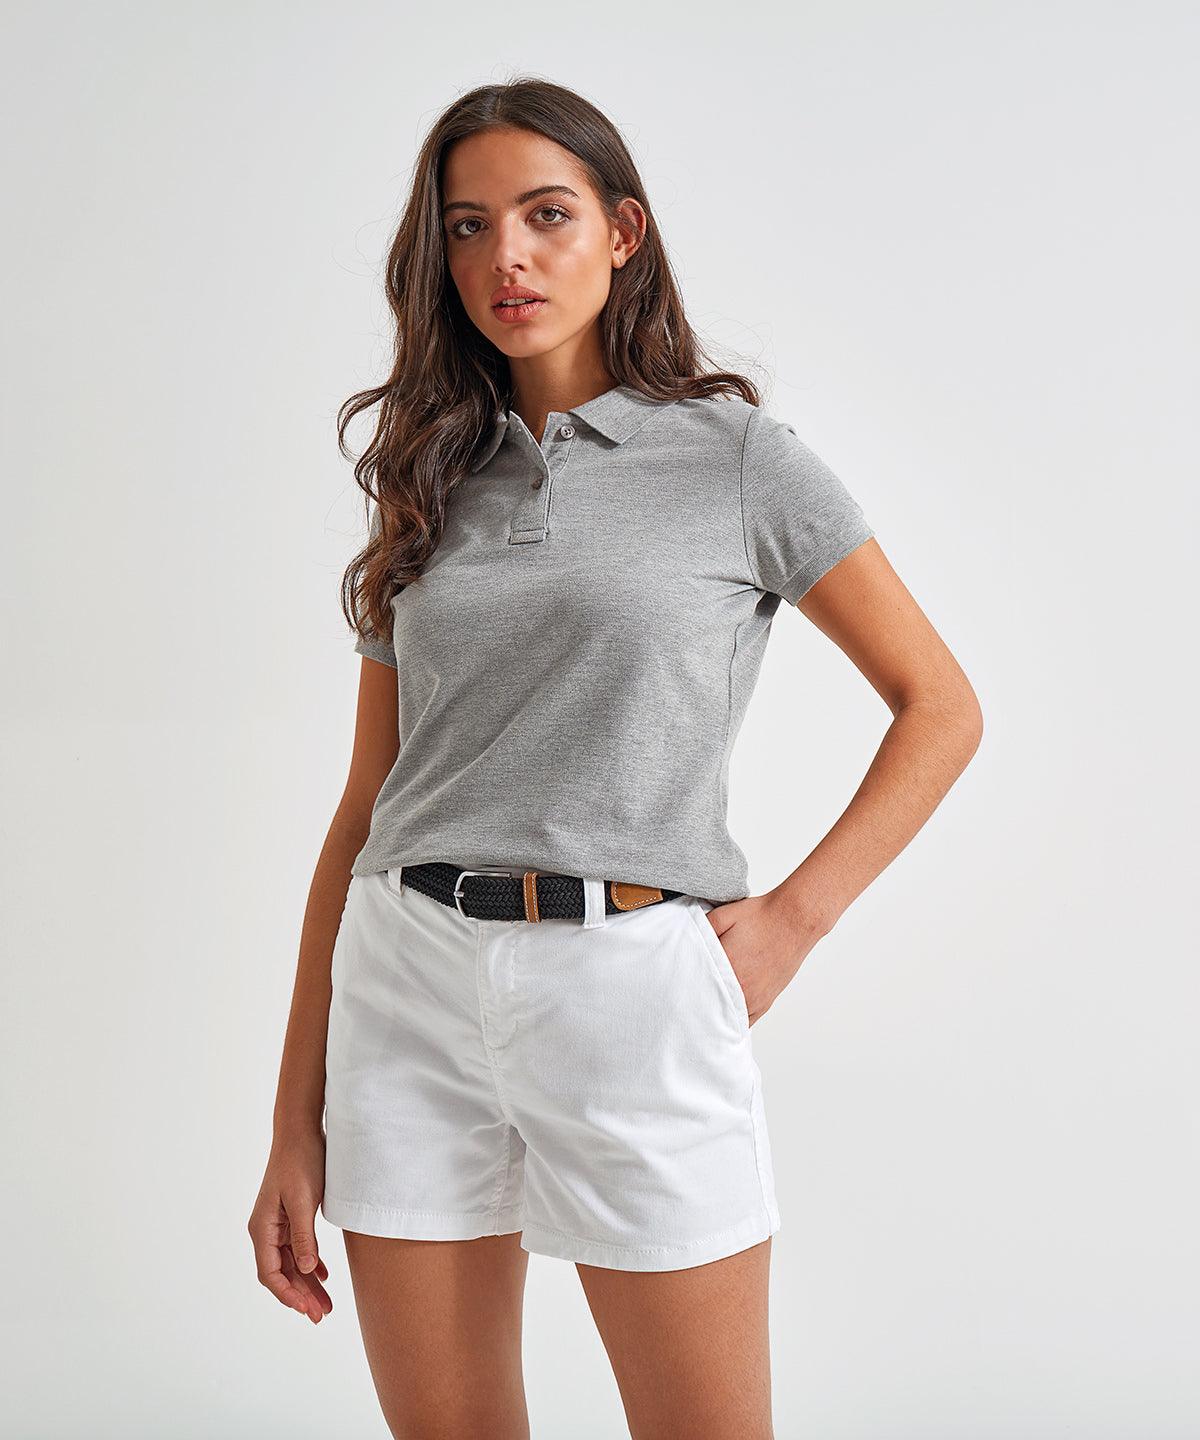 Kelly Green - Women's chino shorts Shorts Asquith & Fox Must Haves, Raladeal - Recently Added, Trousers & Shorts, Women's Fashion Schoolwear Centres